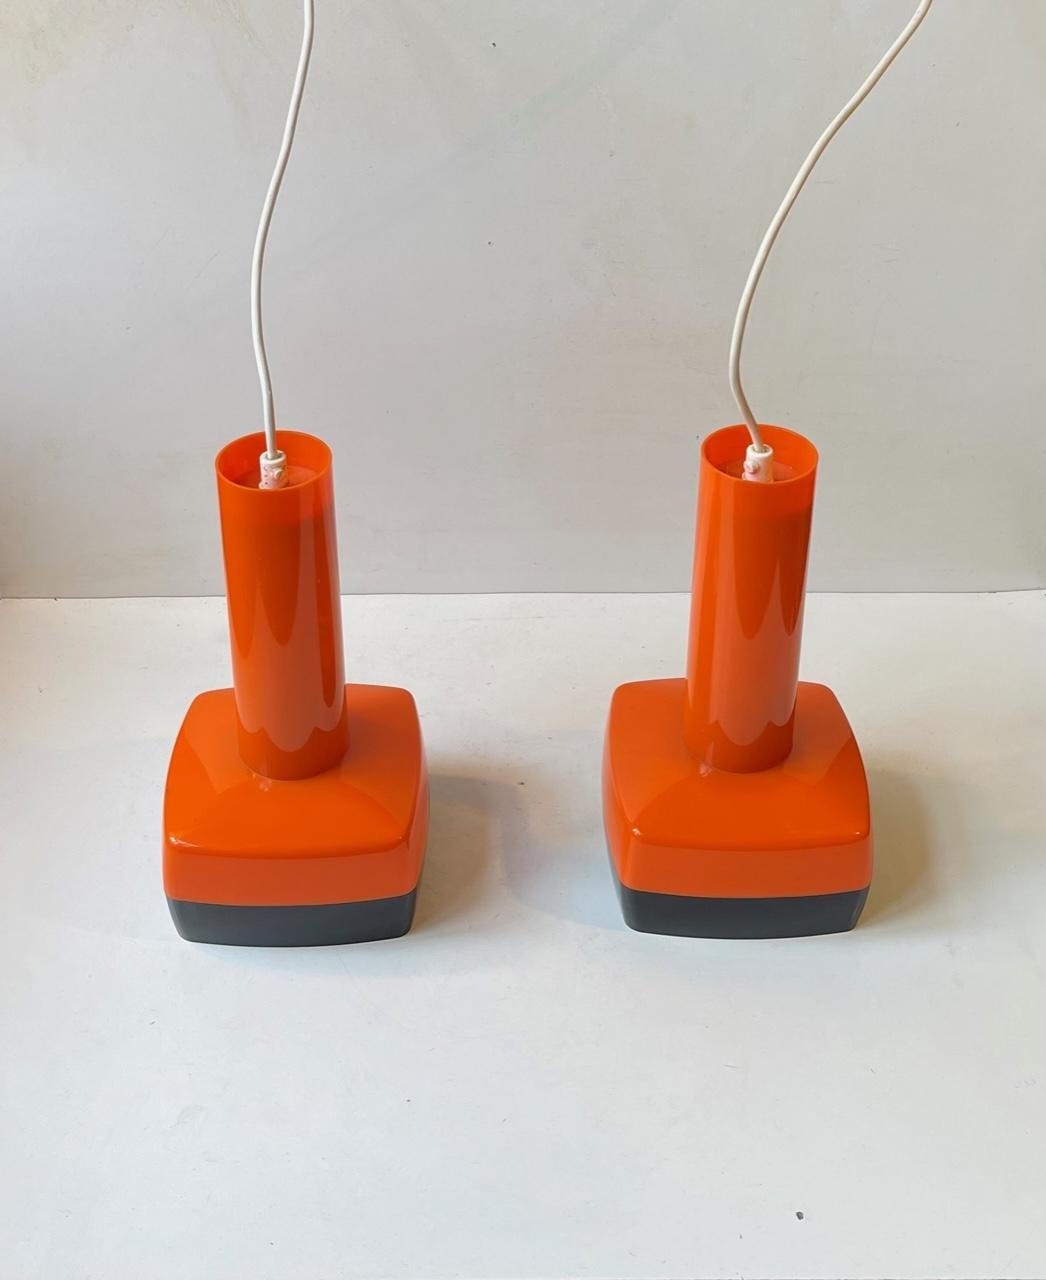 Late 20th Century Danish Orange Plastic Ceiling Lamps by Bent Karlby for a. Schroder Kemi For Sale